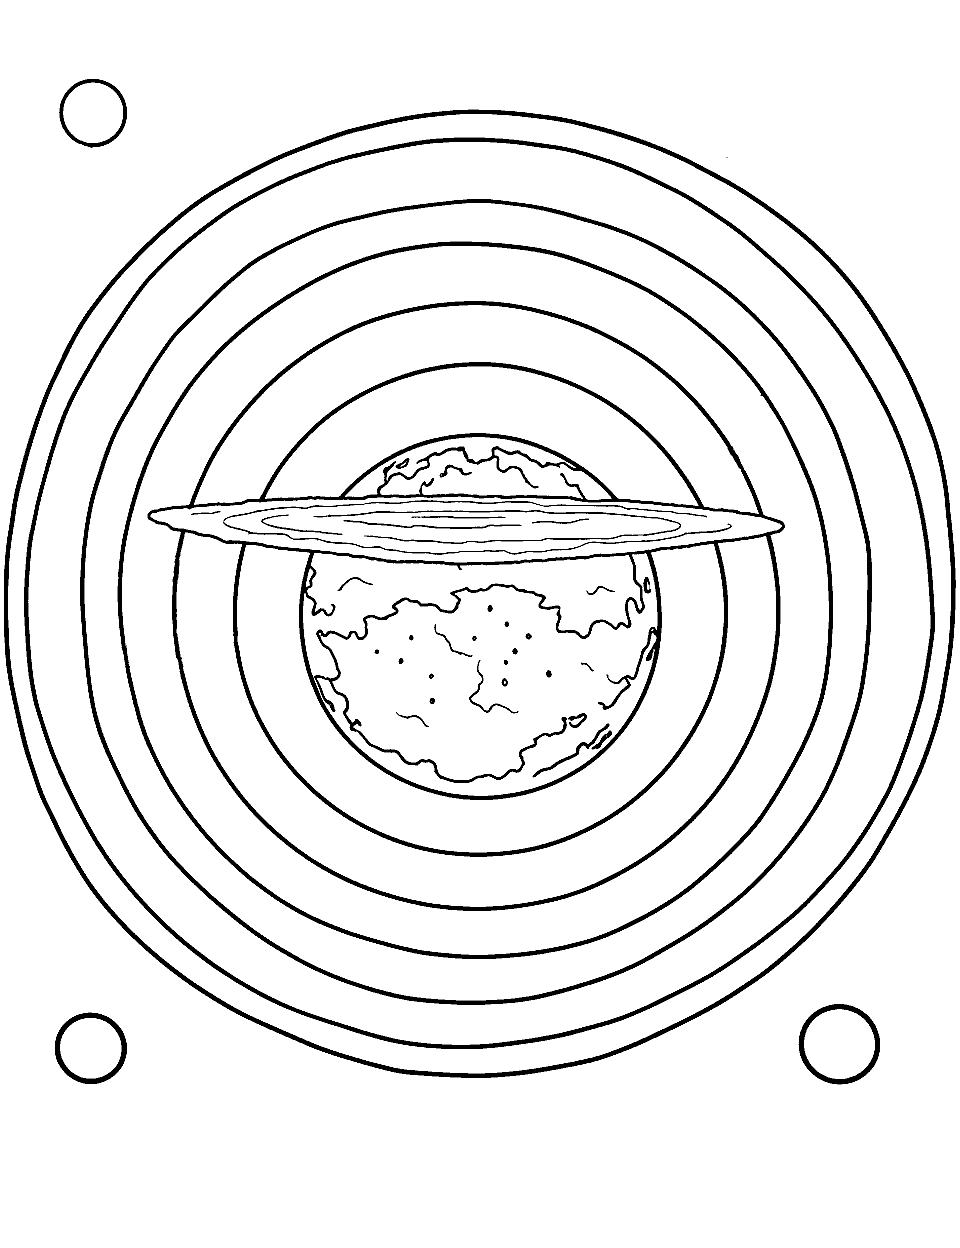 Earth's Atmosphere Layers Solar System Coloring Page - The layers of Earth’s atmosphere.